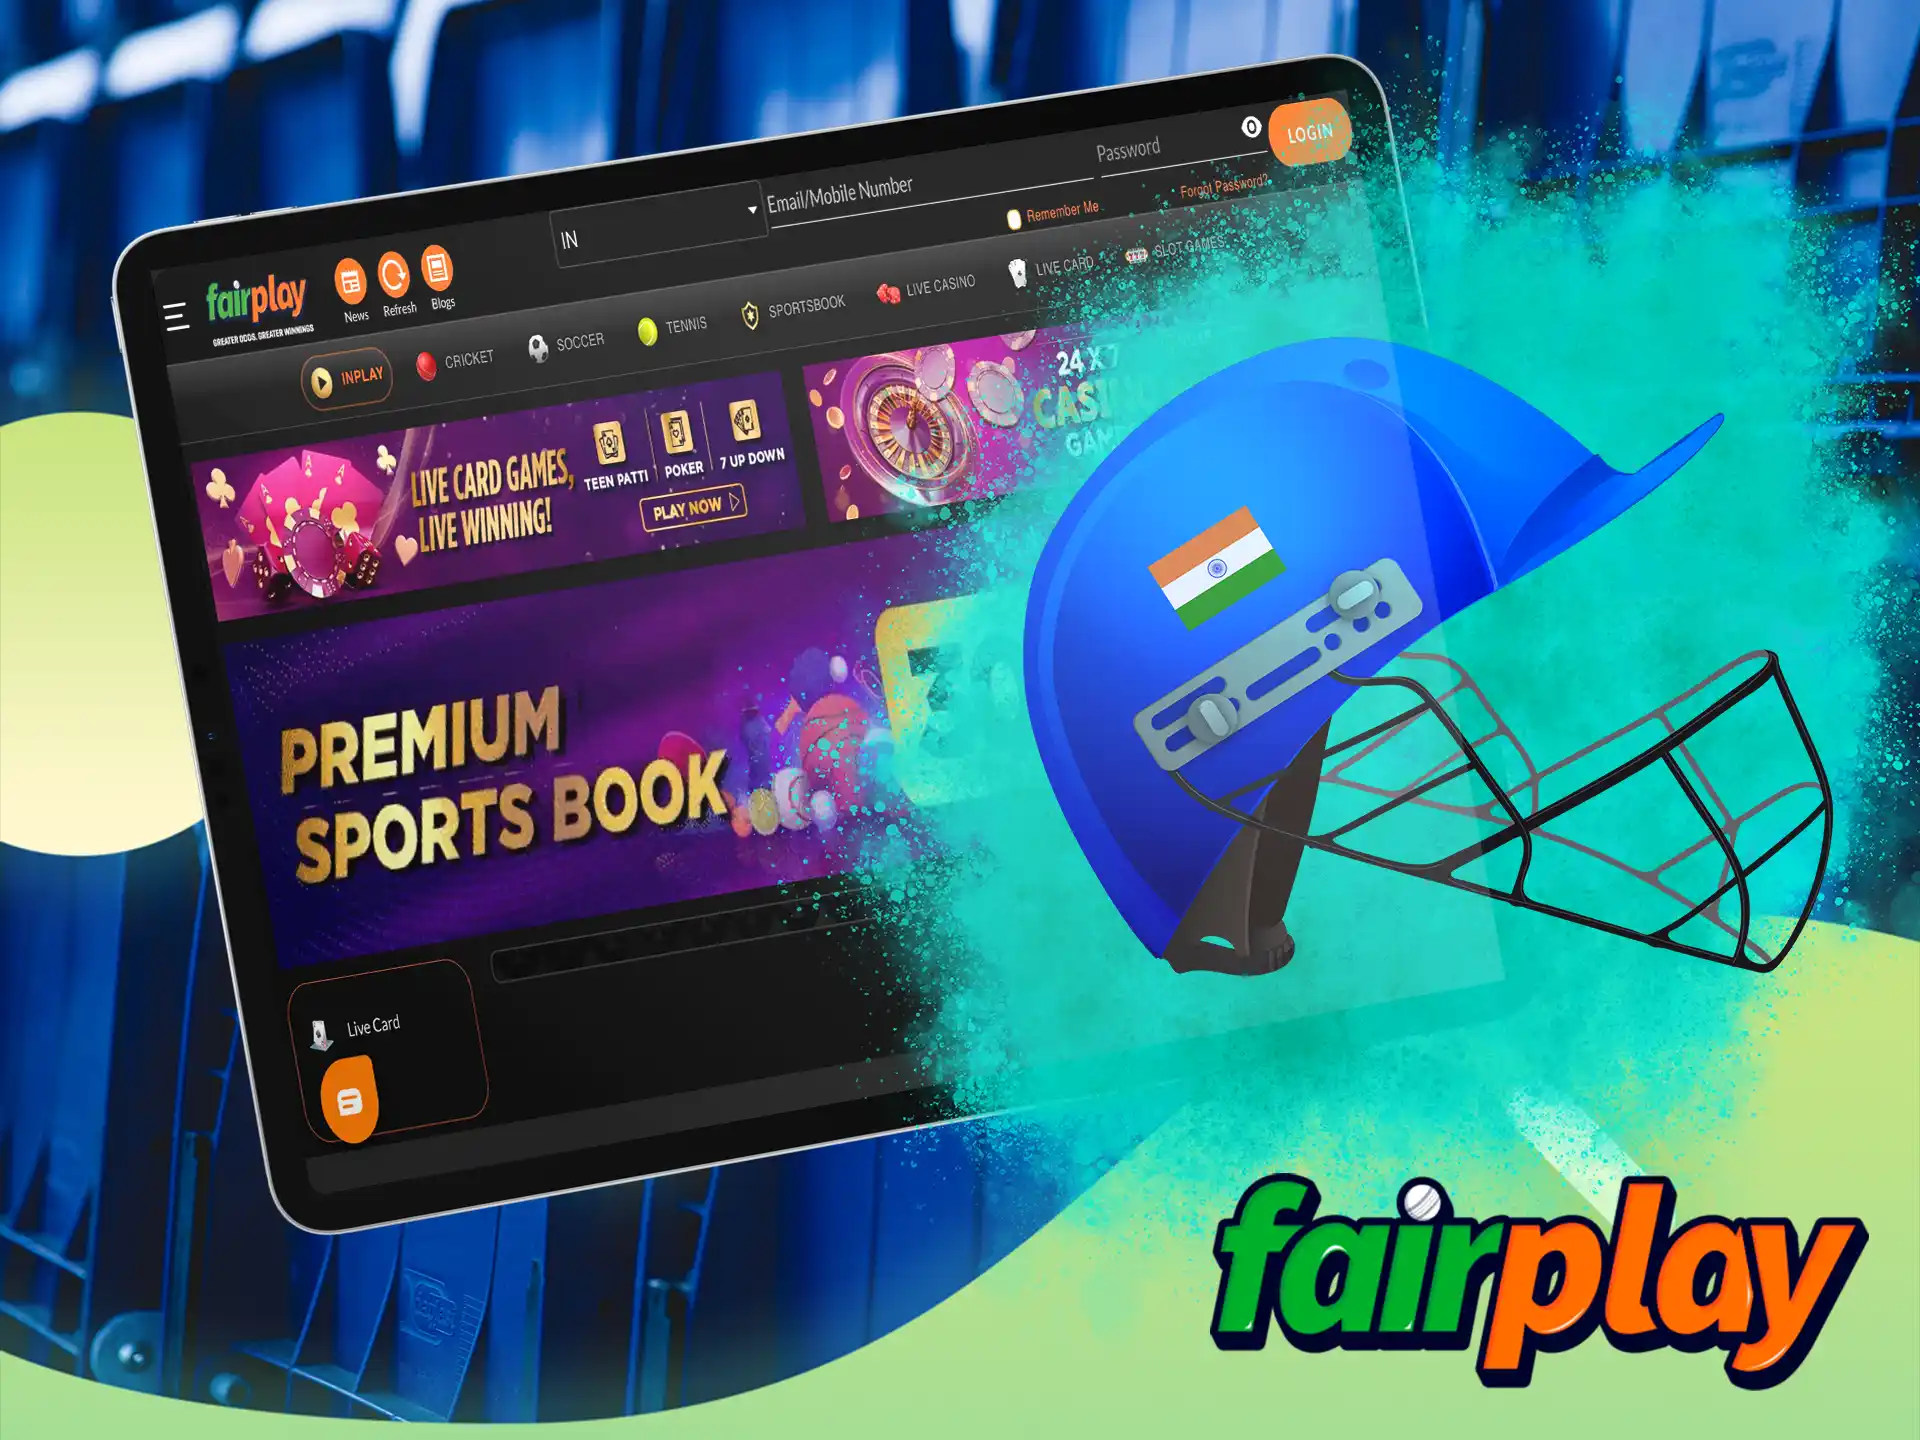 The bookmaker focuses on cricket betting, you can create an account, verify your identity and start an exciting game at Fairplay.